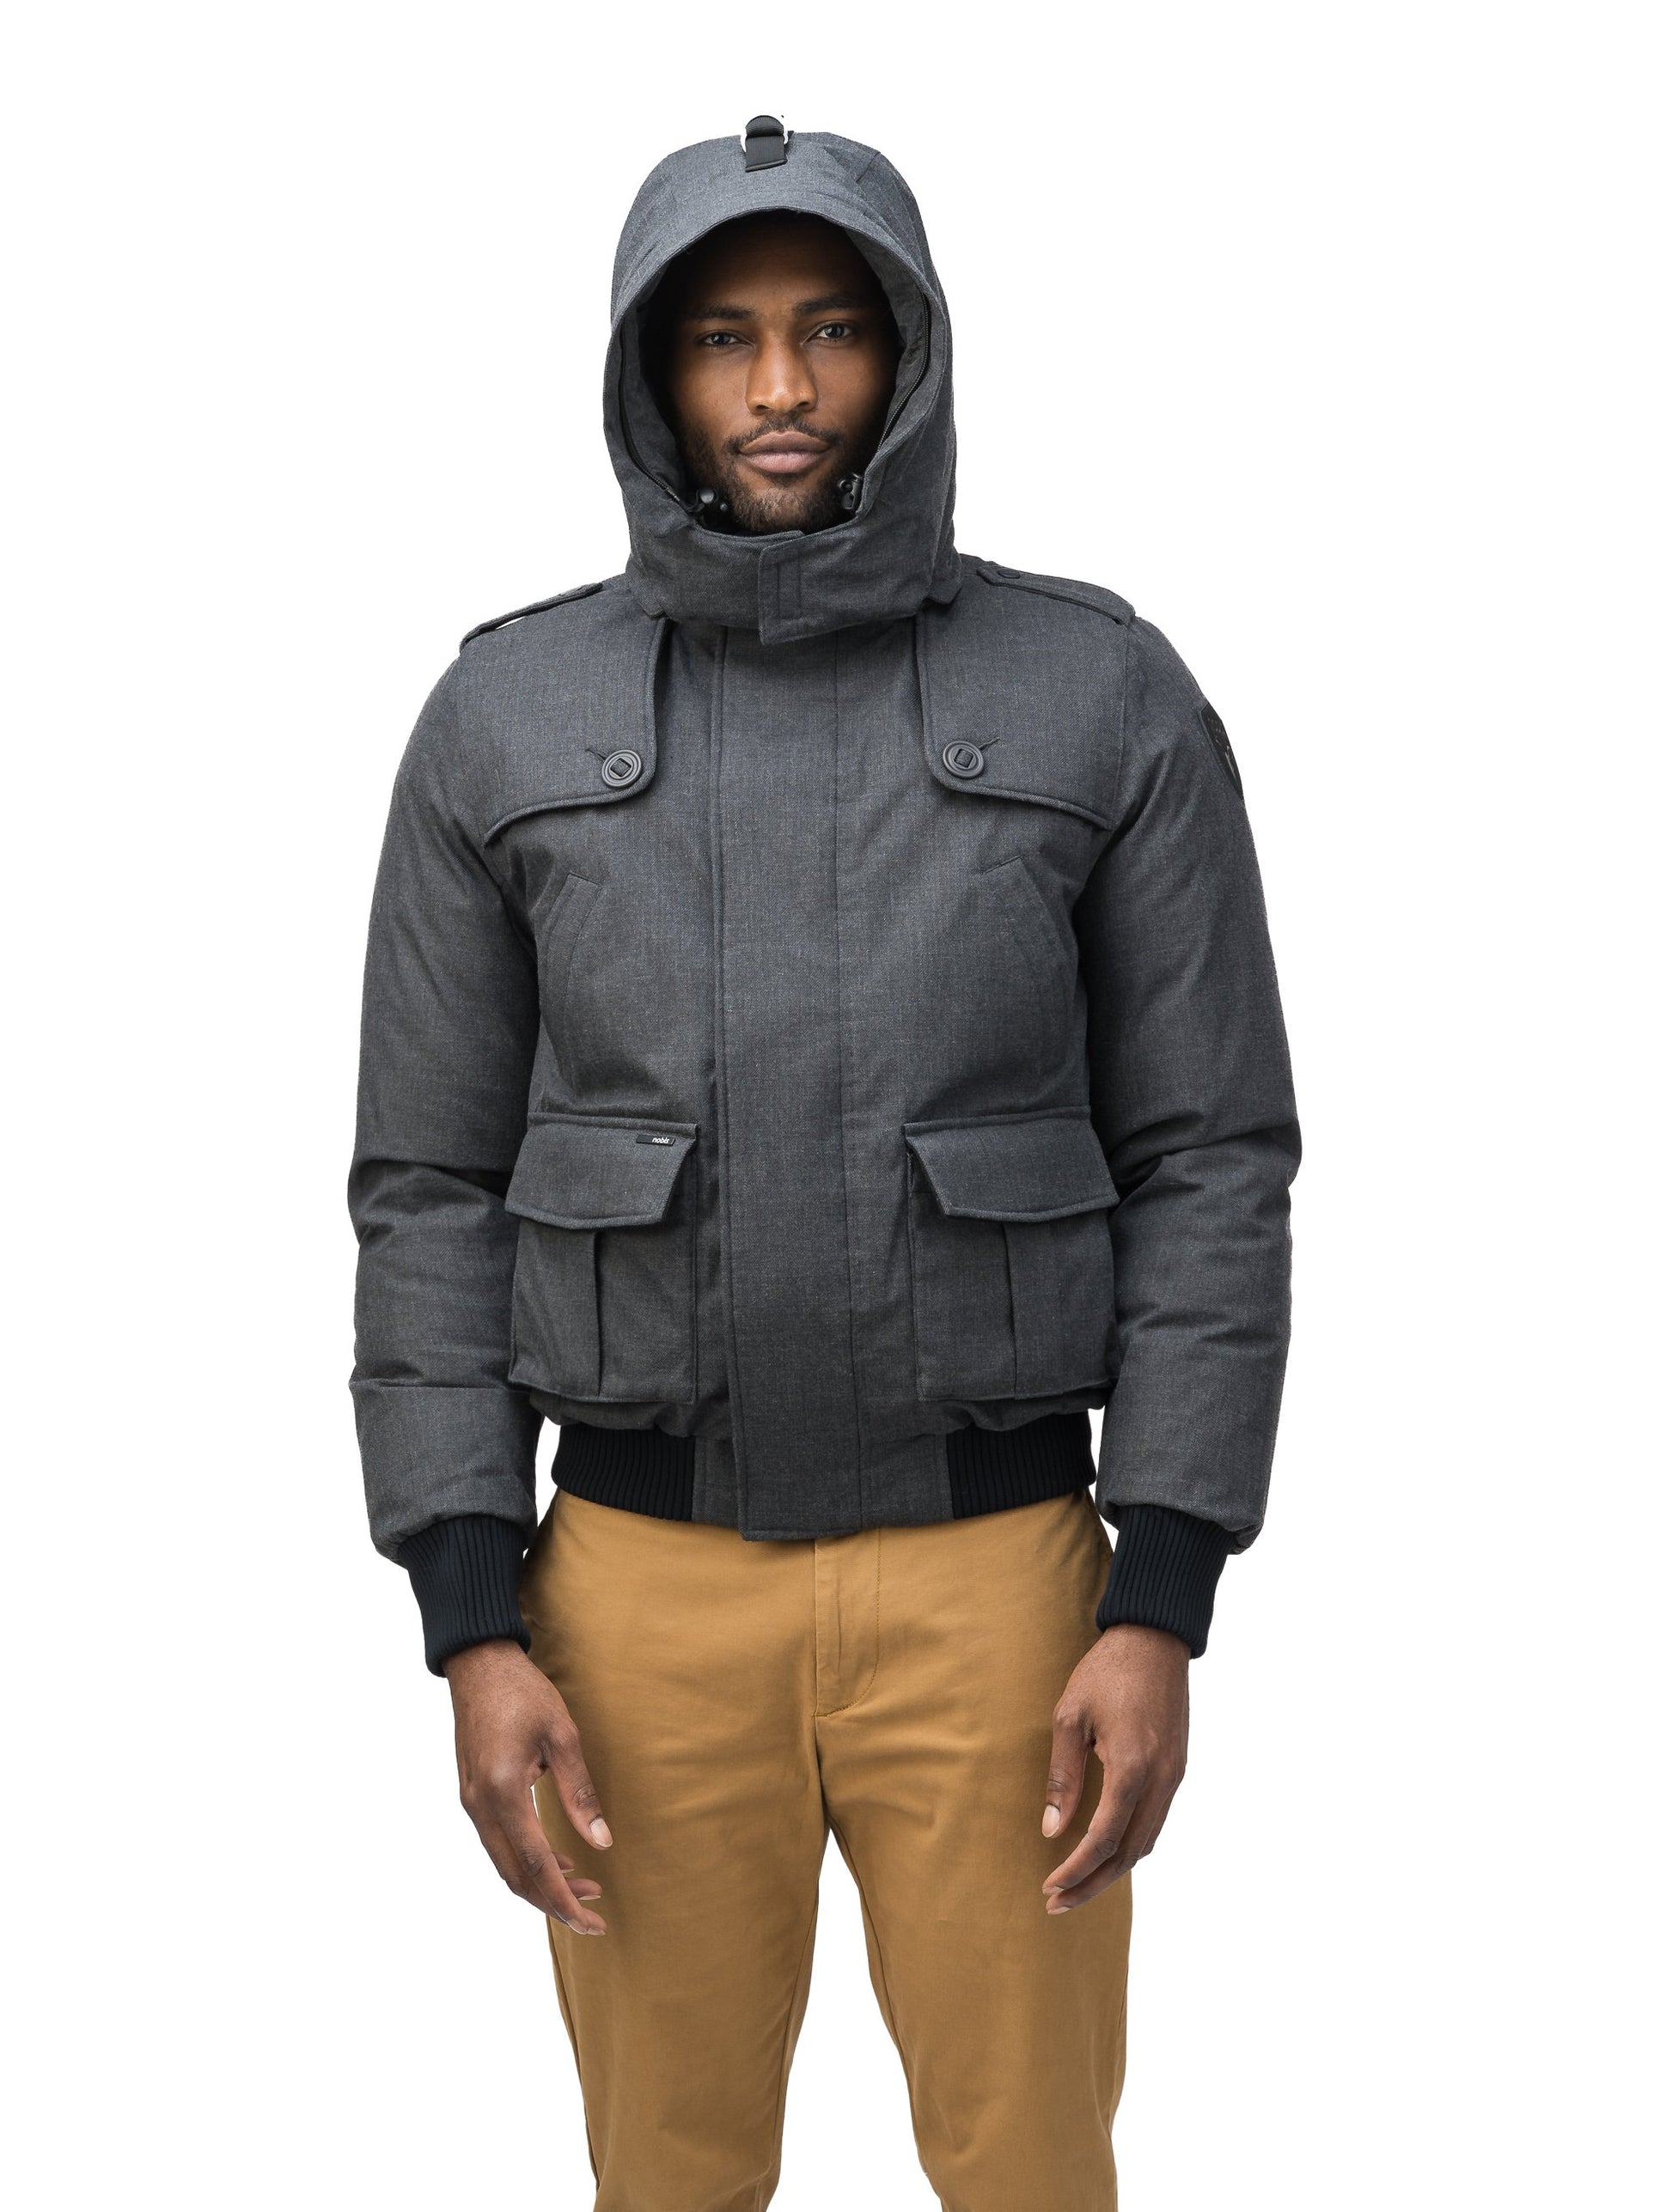 Men's down filled bomber that sits just above the hips with a completely removable hood that's windproof, waterproof, and breathable in H. Charcoal